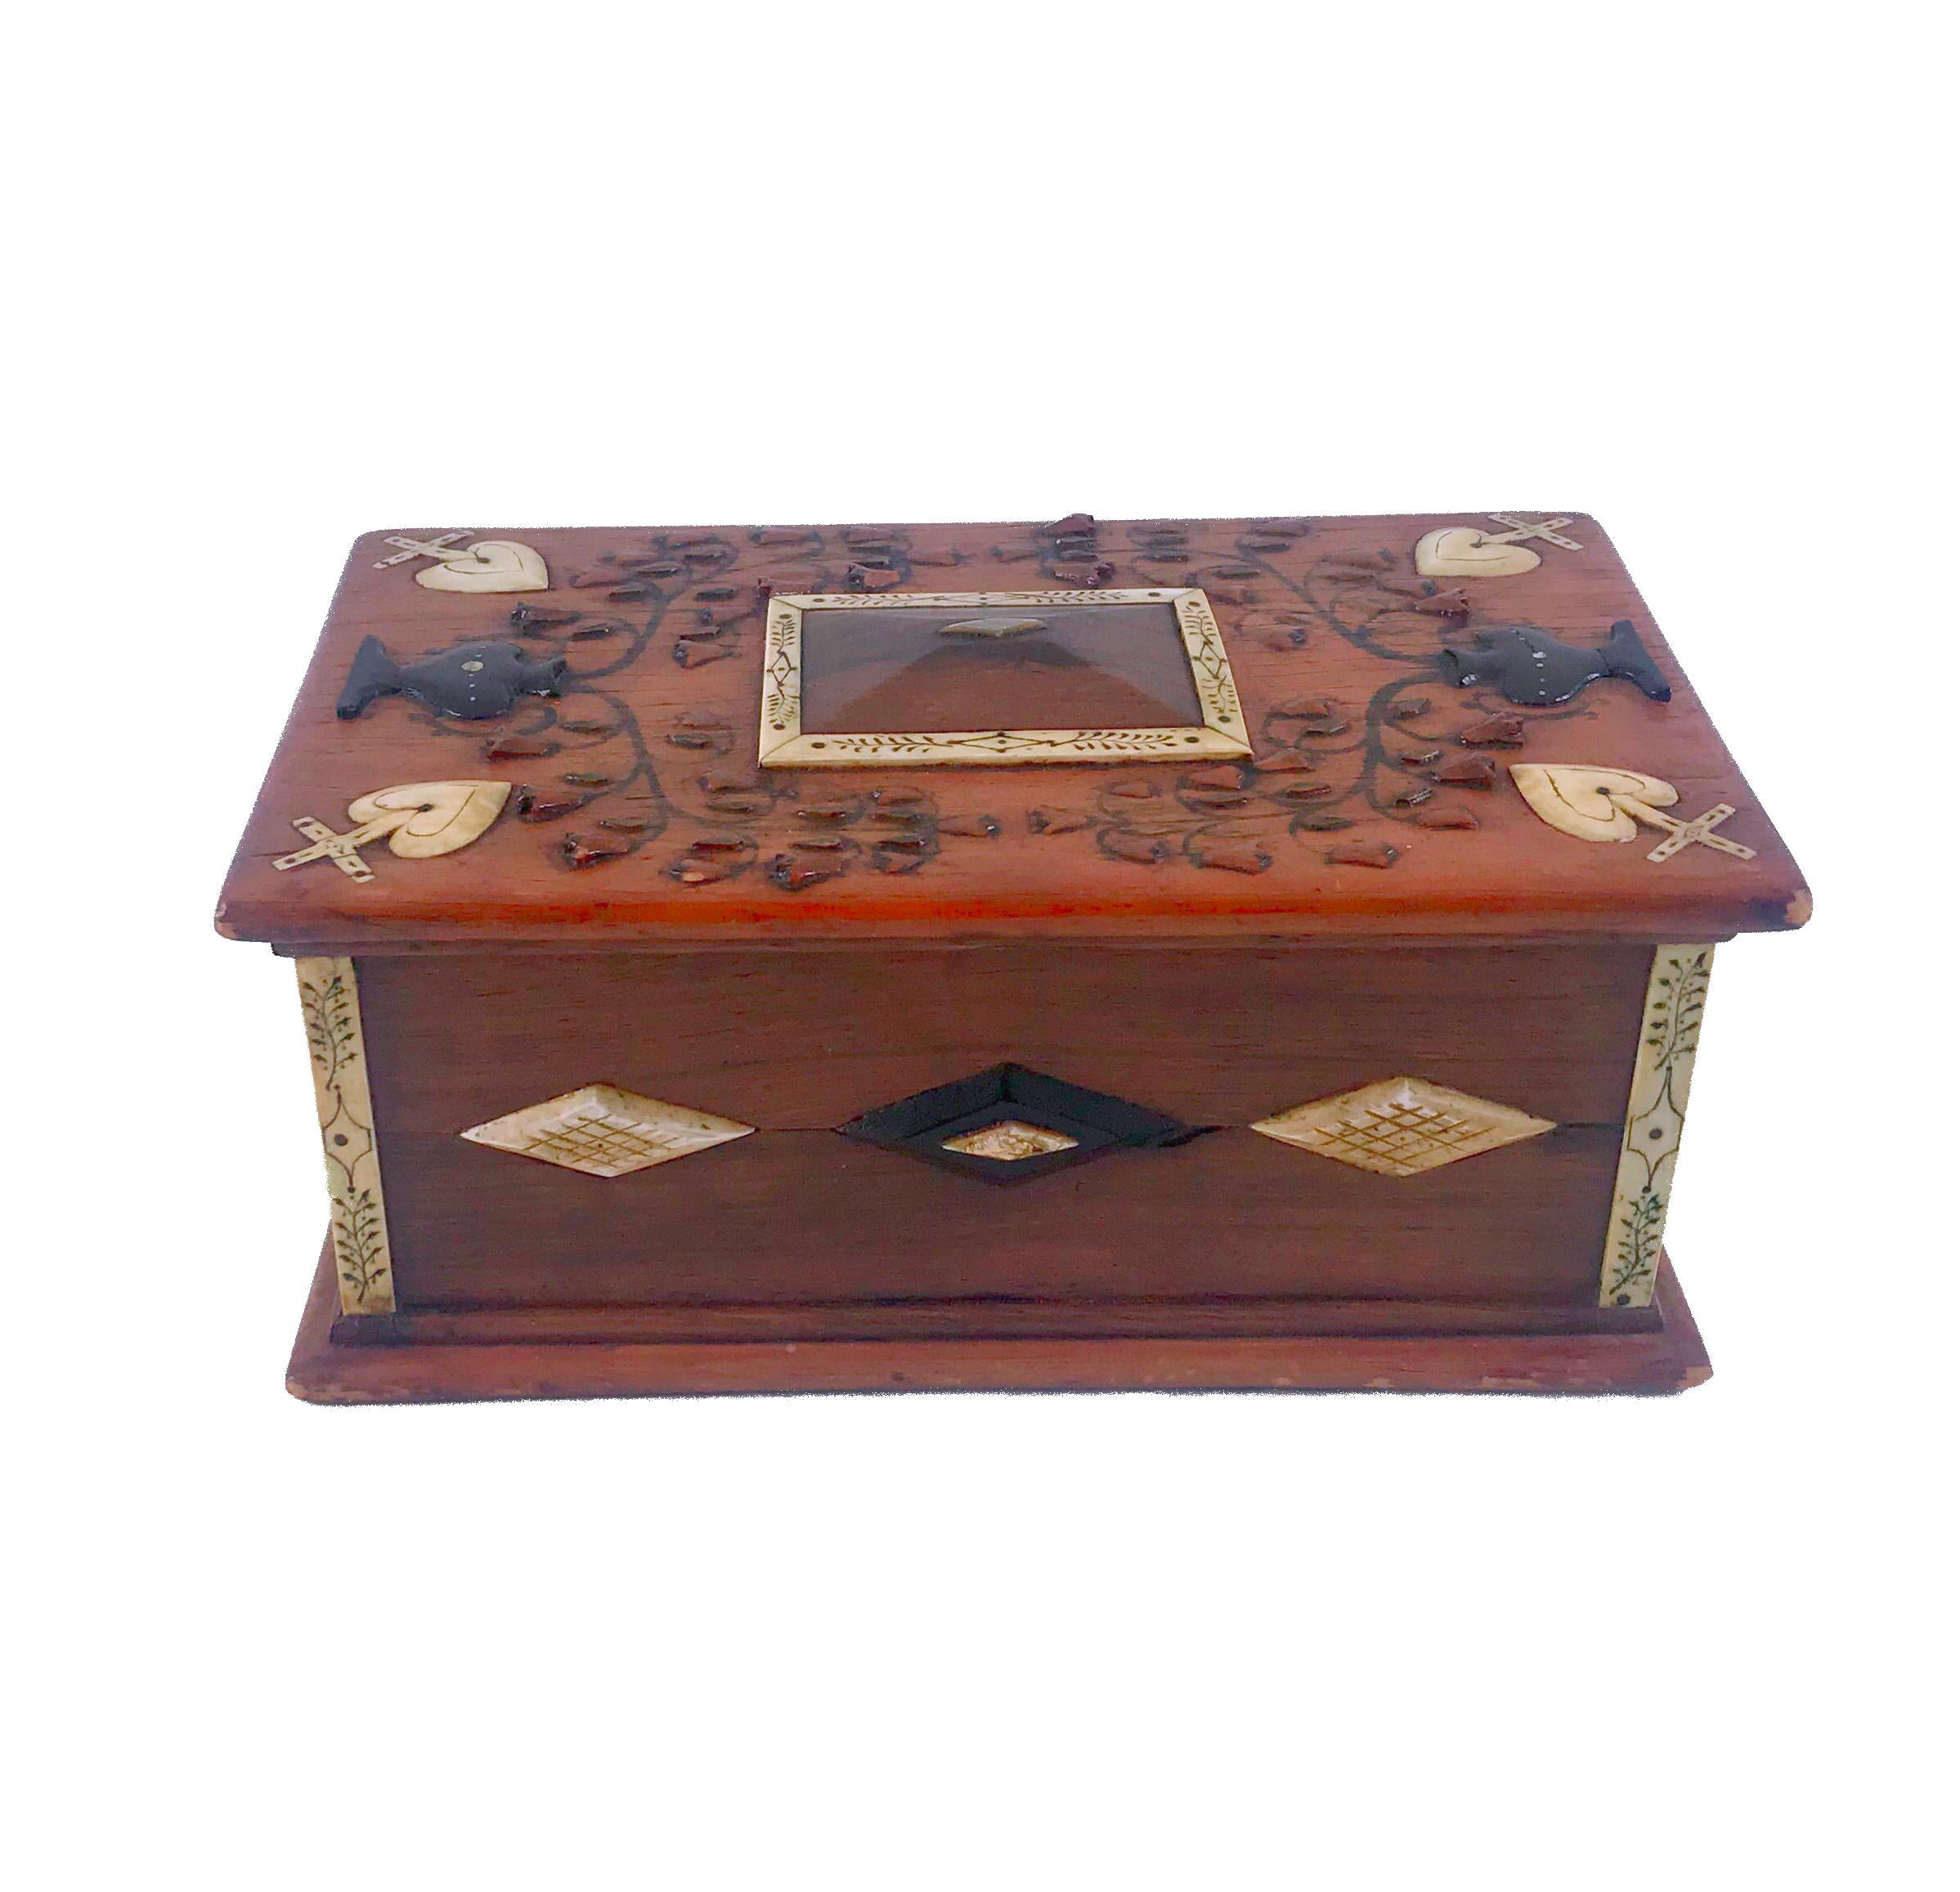 Intricately designed sailor made rosewood and pine lift top box
made from ebony, mother of pearl, ivory and whalebone.
The center of the lid having a pyramid top with a mother of pearl diamond and surrounded by whale ivory panels with the rest of